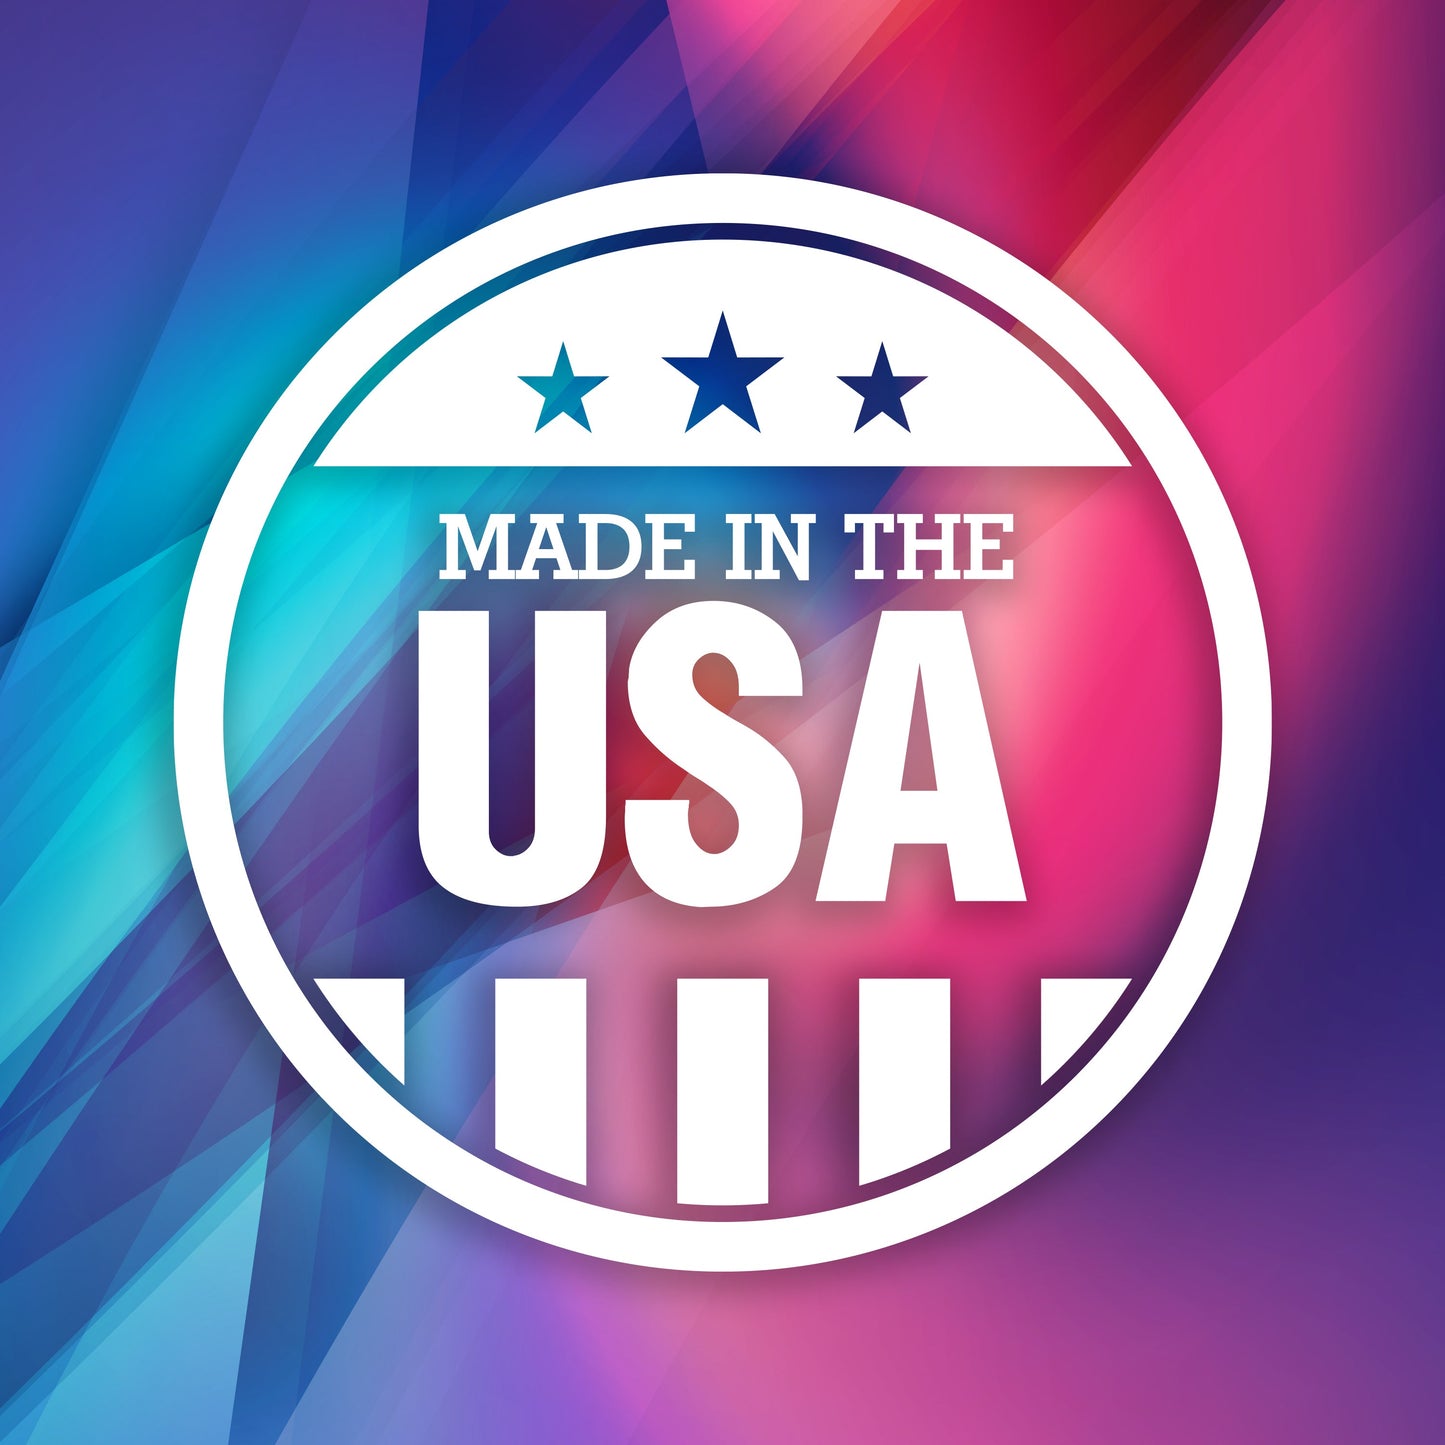 Made in the USA - authentic American product.